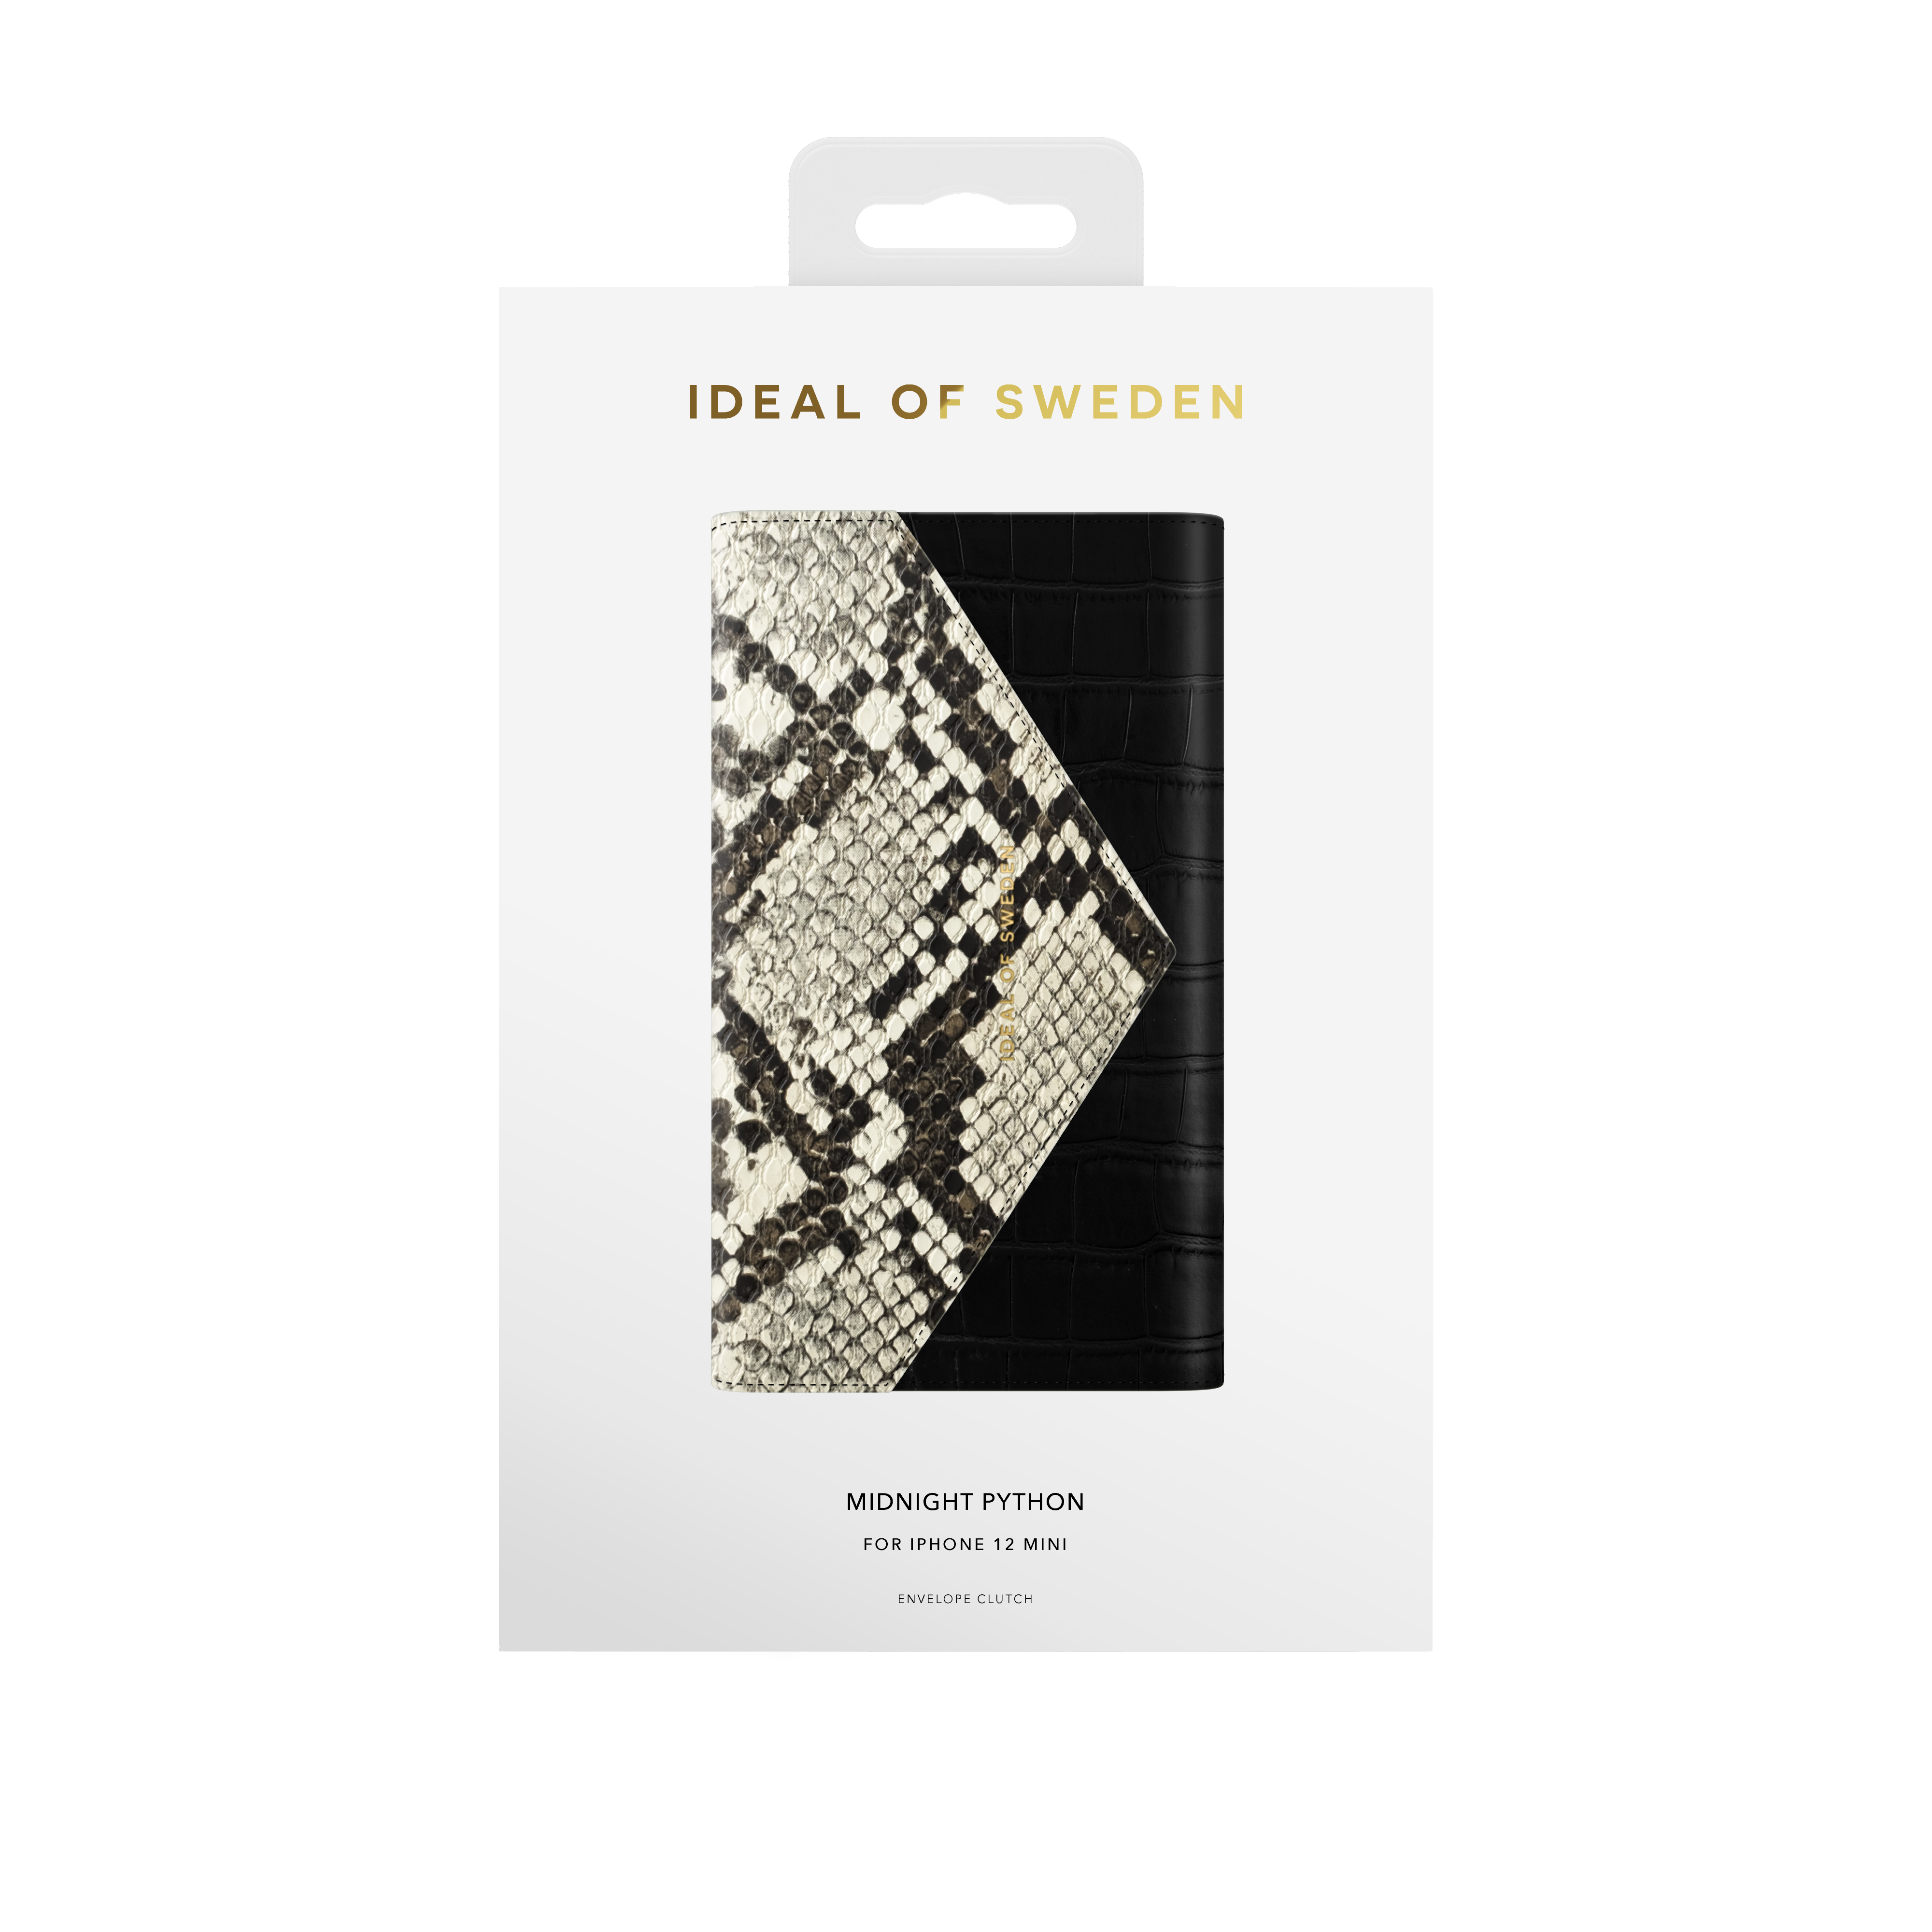 OF Apple, 12 IPhone IDECSS20-I2054-199, Python Cover, Full IDEAL SWEDEN Midnight Mini,